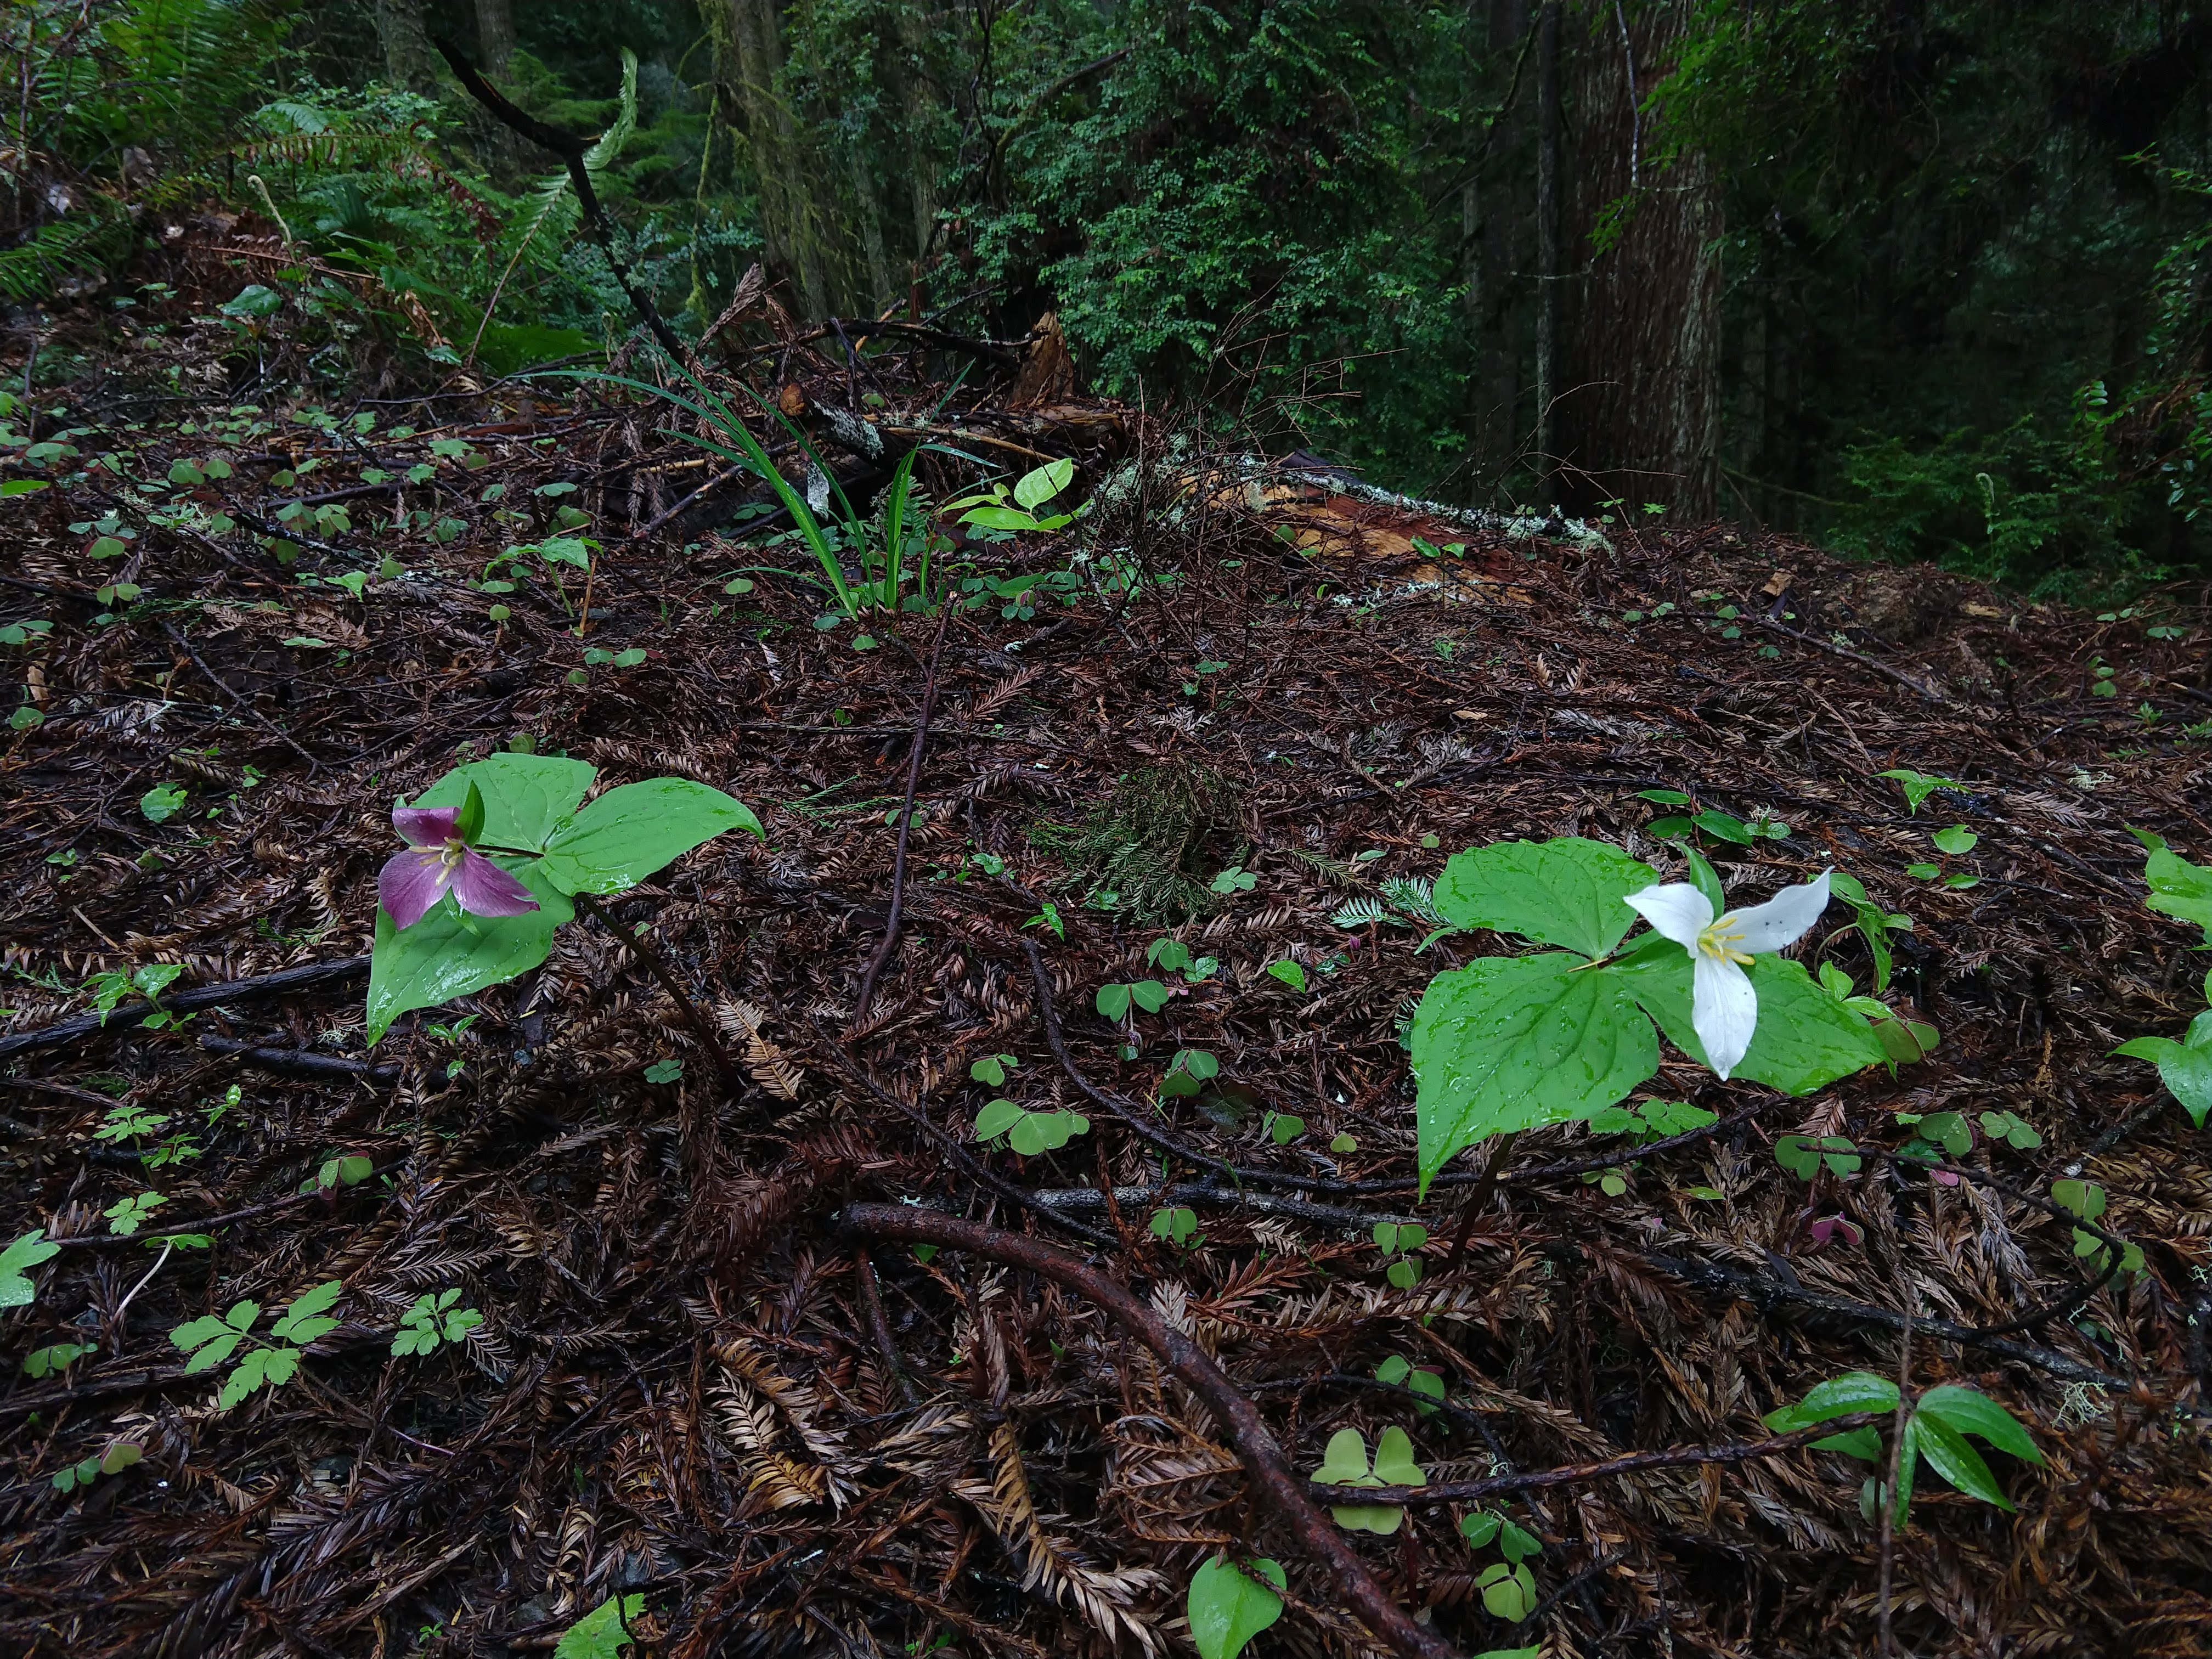 Two Trillium flowers of the same species. The one on the left is purple, while the one on the right is white. 